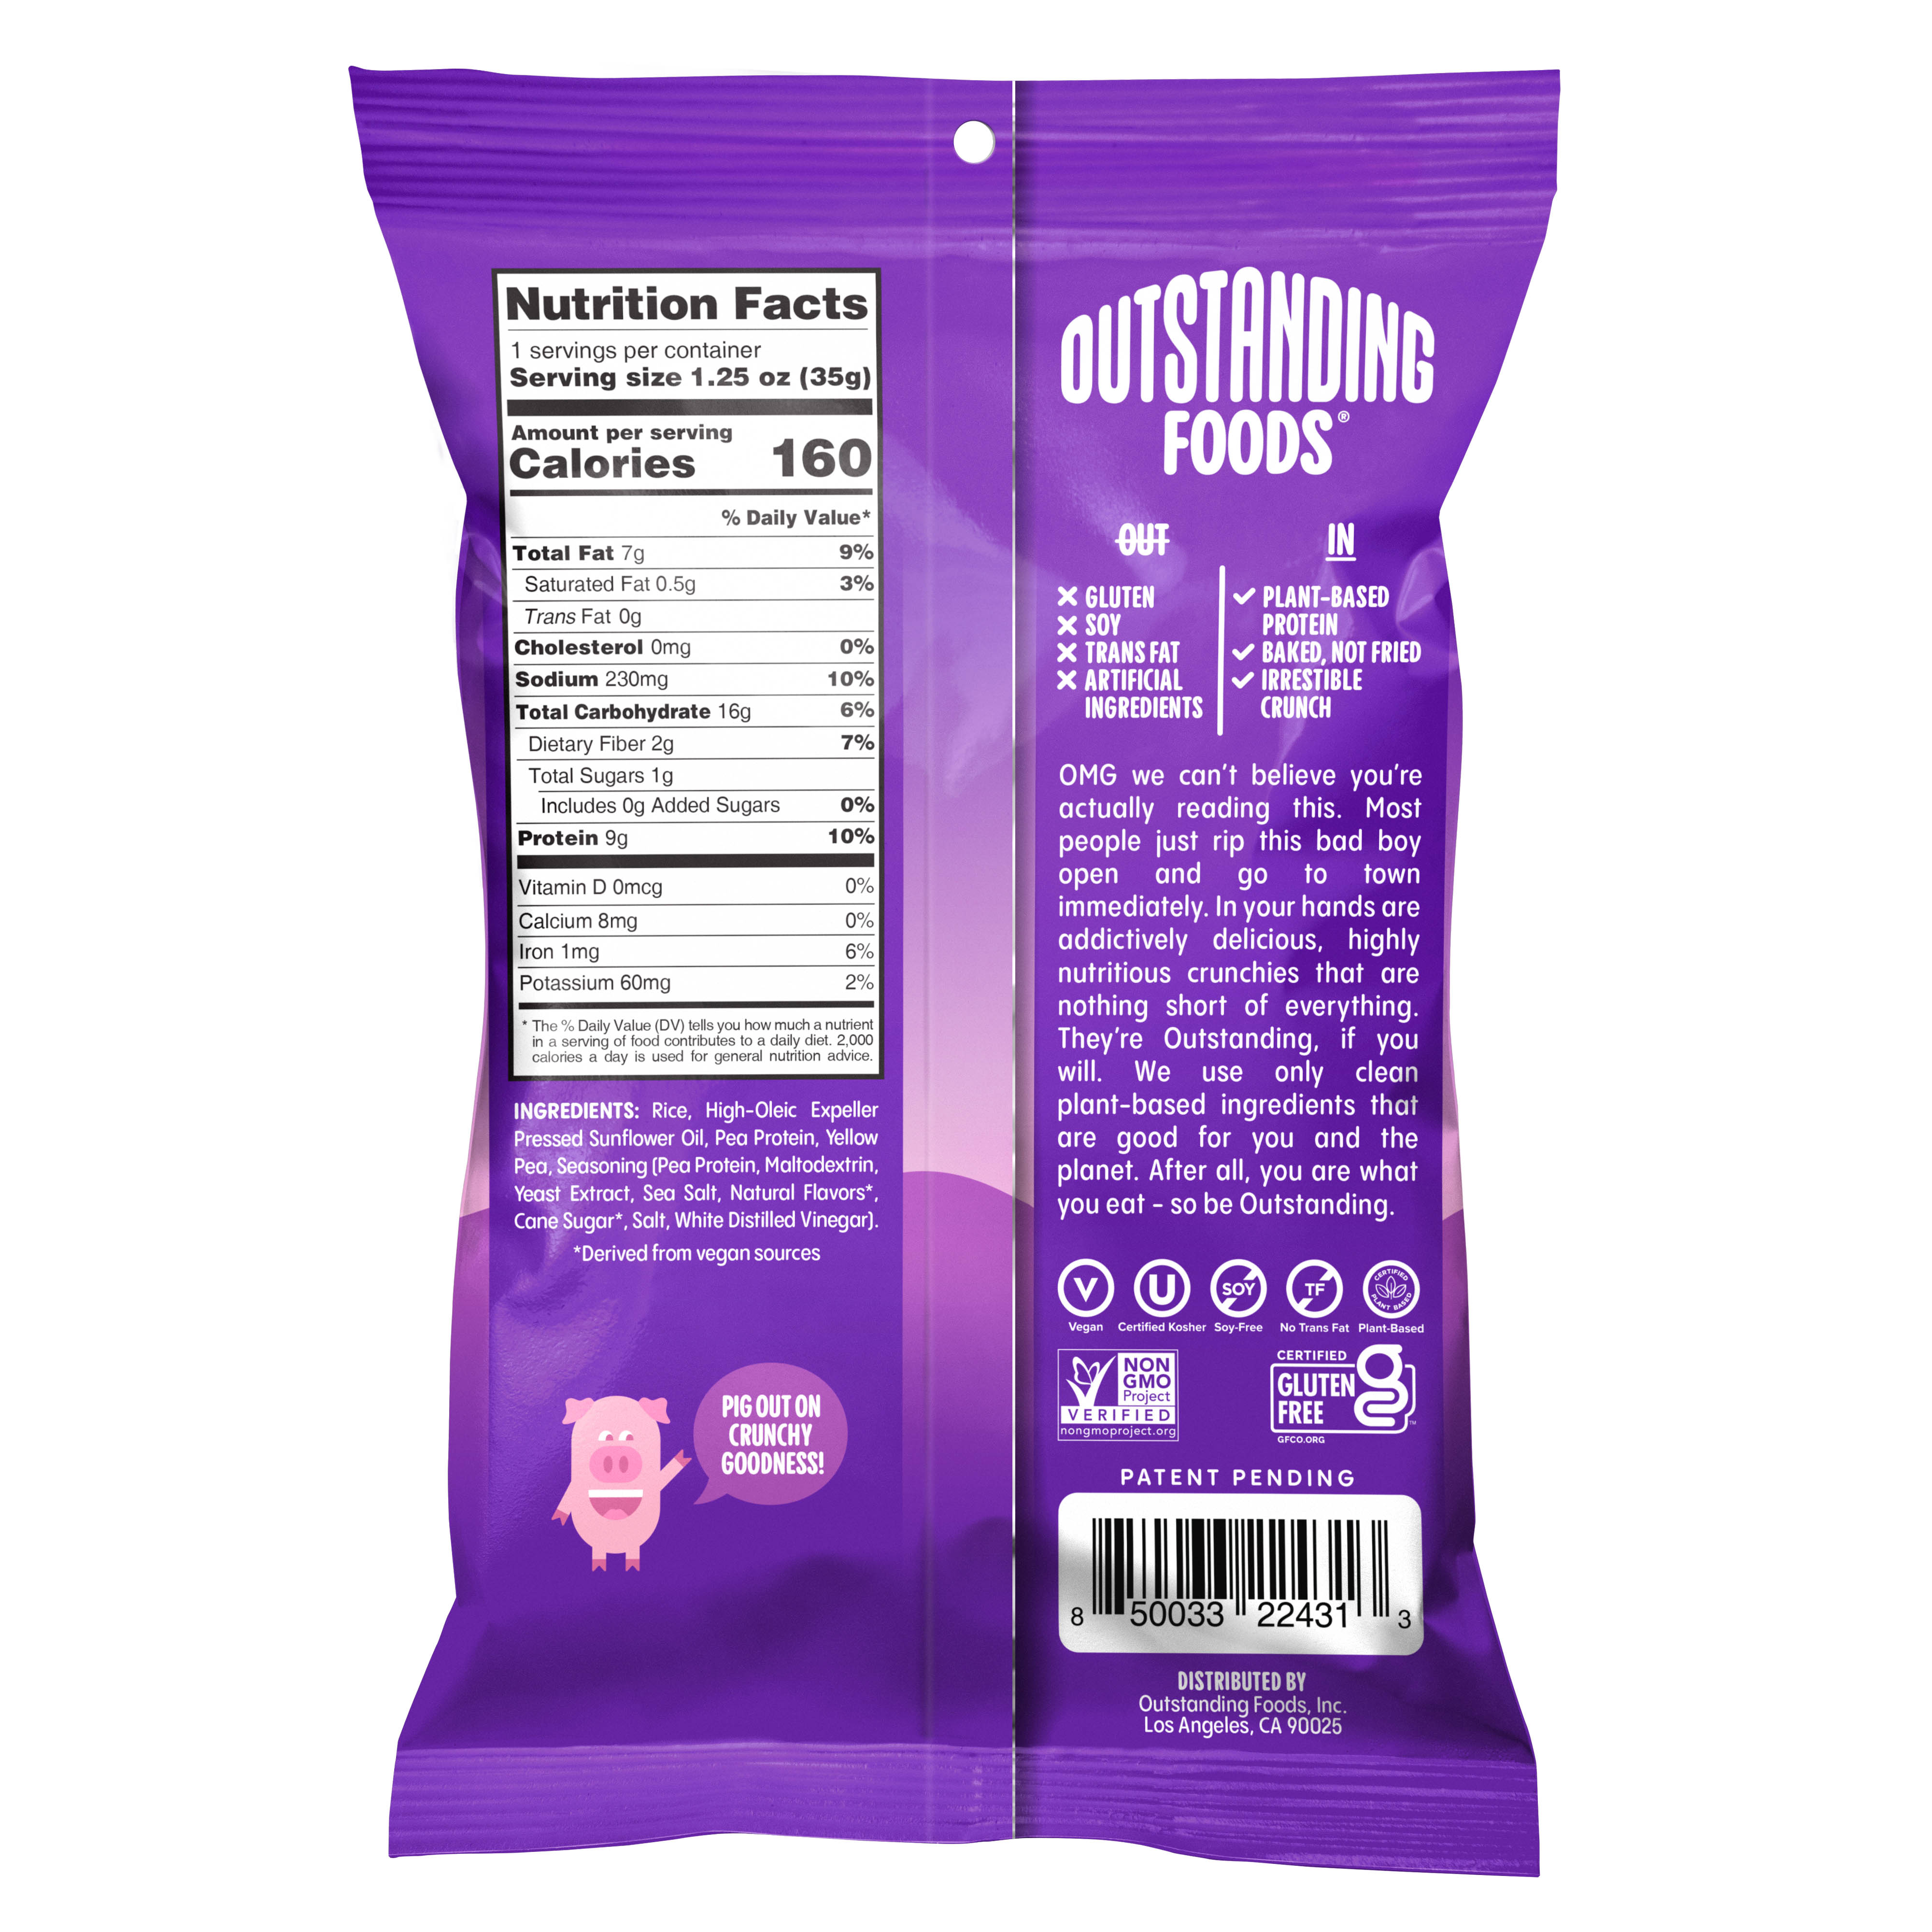 Outstanding Foods - Outstanding Pig Out Crunchies, Sea Salt, Snack Size 8 units per case 1.3 oz